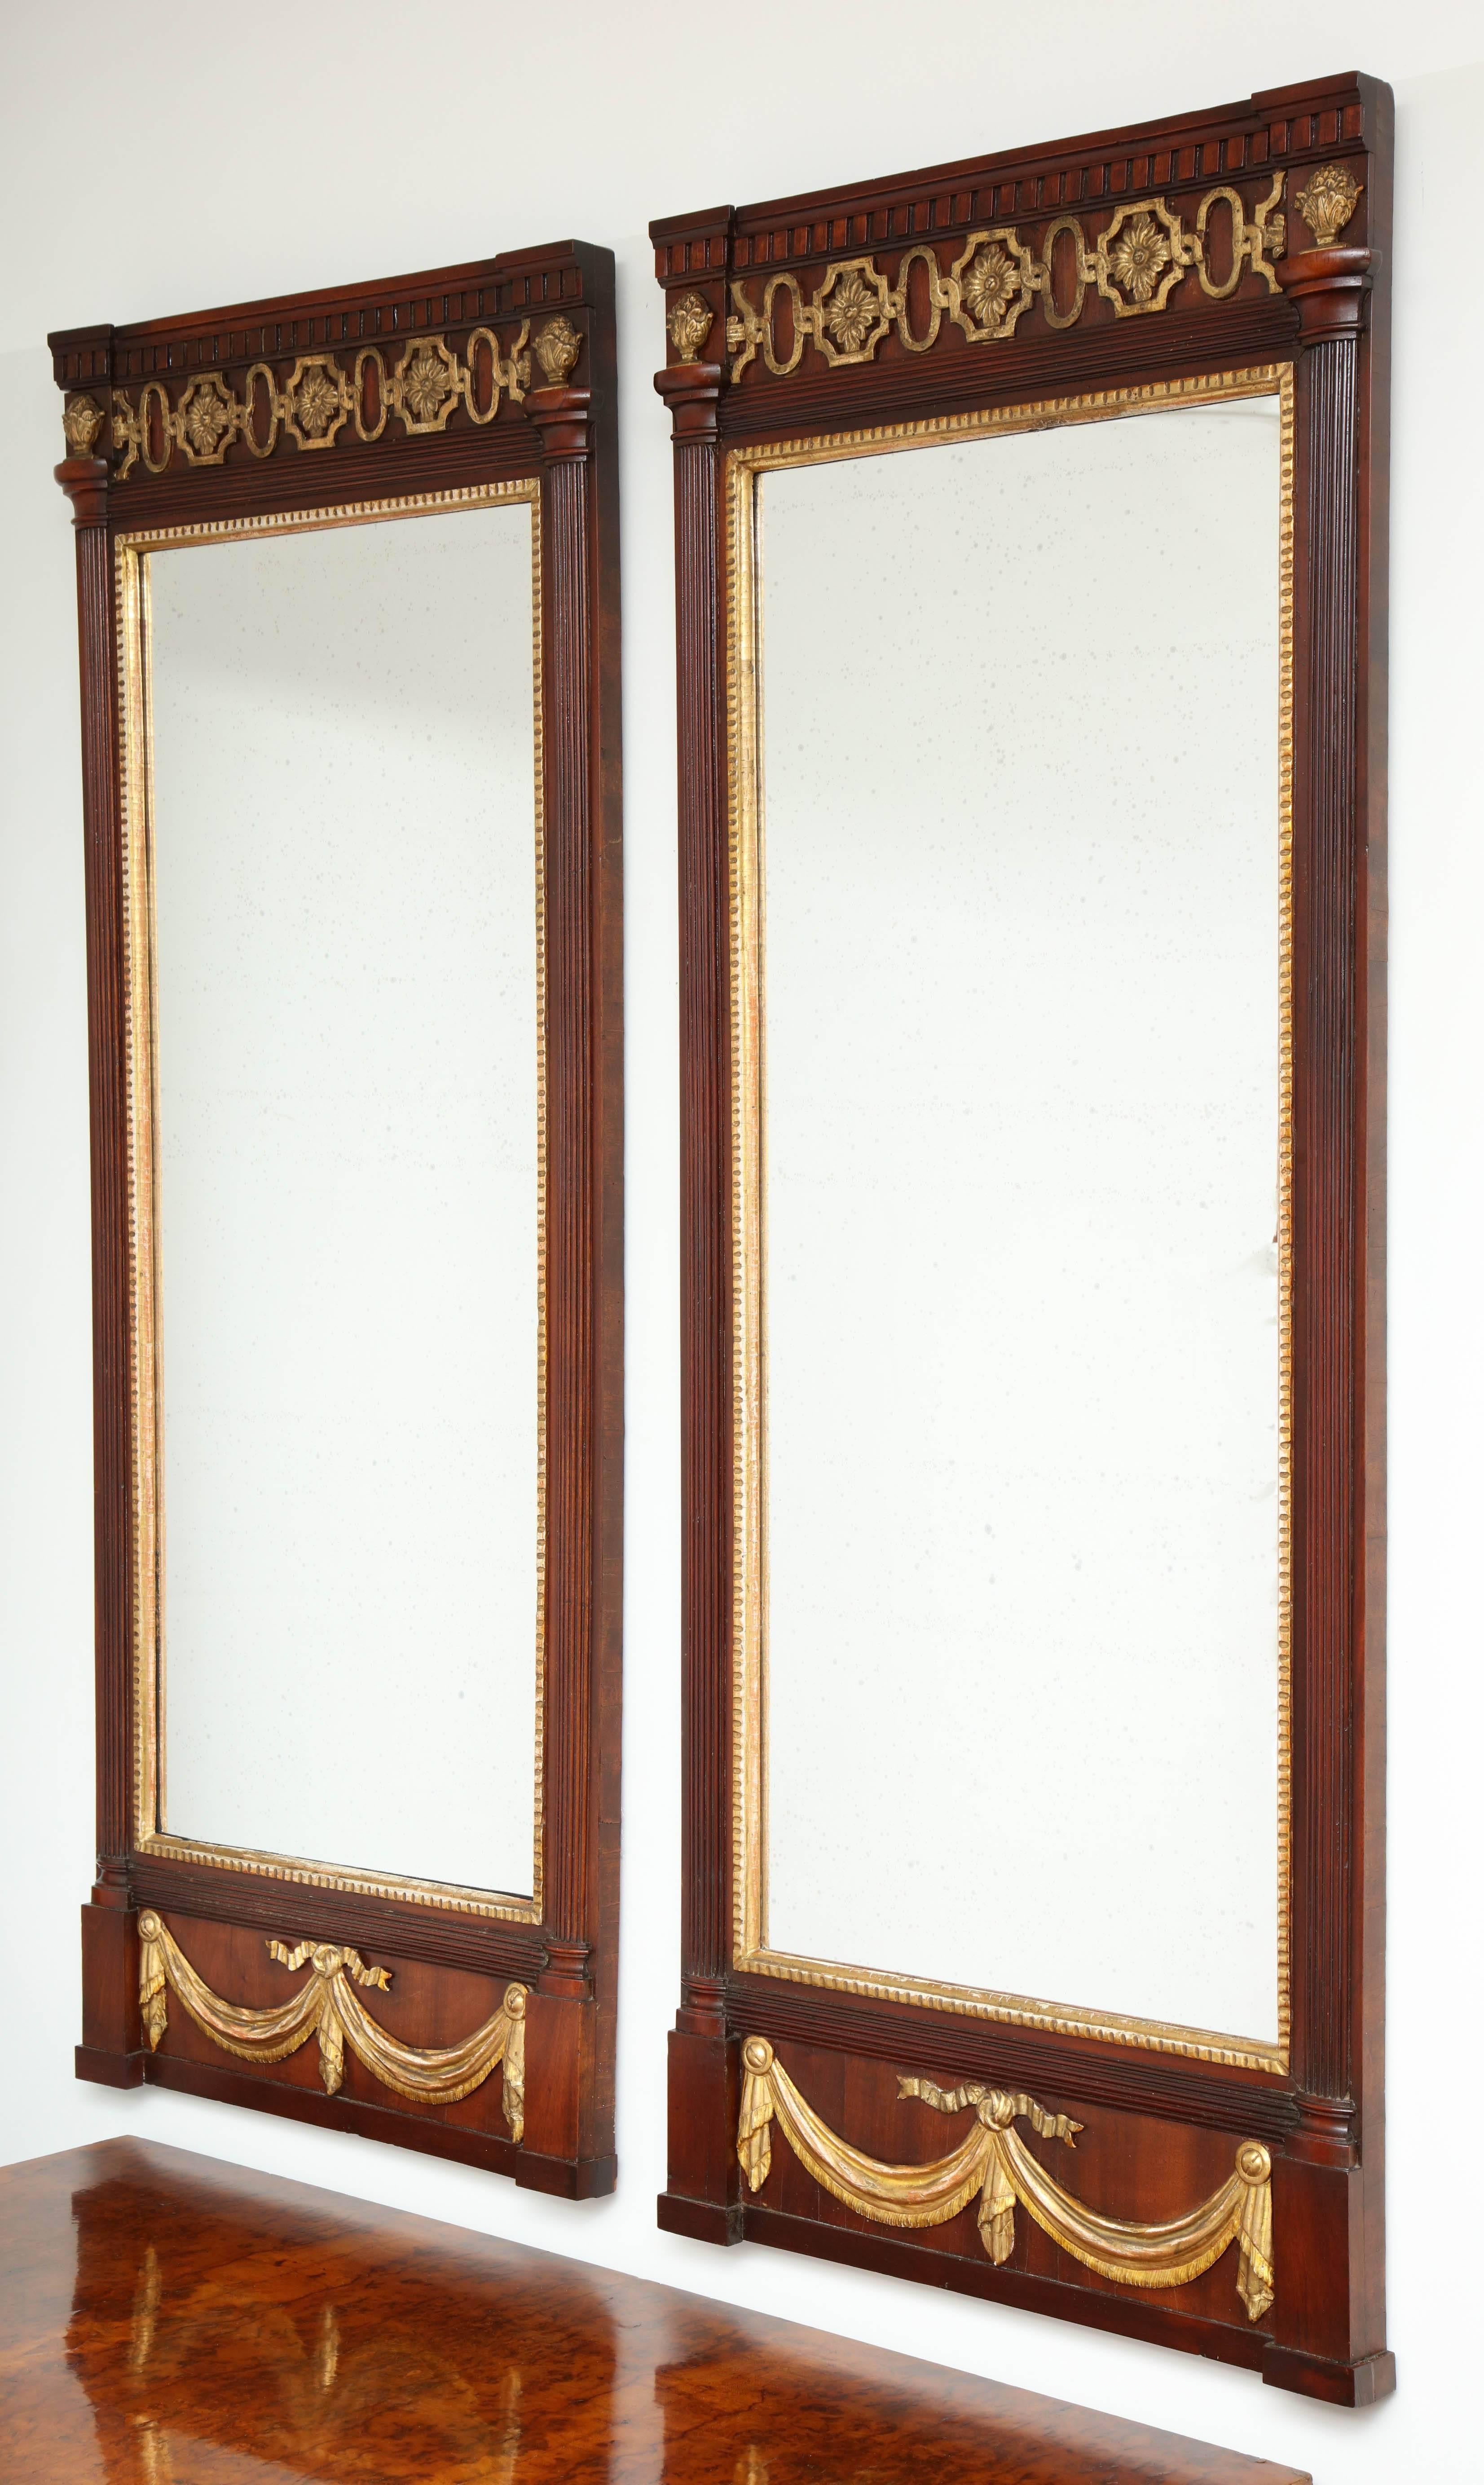 A pair of Danish Louis XVI mahogany and parcel-gilt mirrors, circa 1790s, each with a dentil frieze, half round pilaster and a gilded drapery swag. Both mirrors have replaced restoration mirror glass. These mirrors were probably set in a paneled